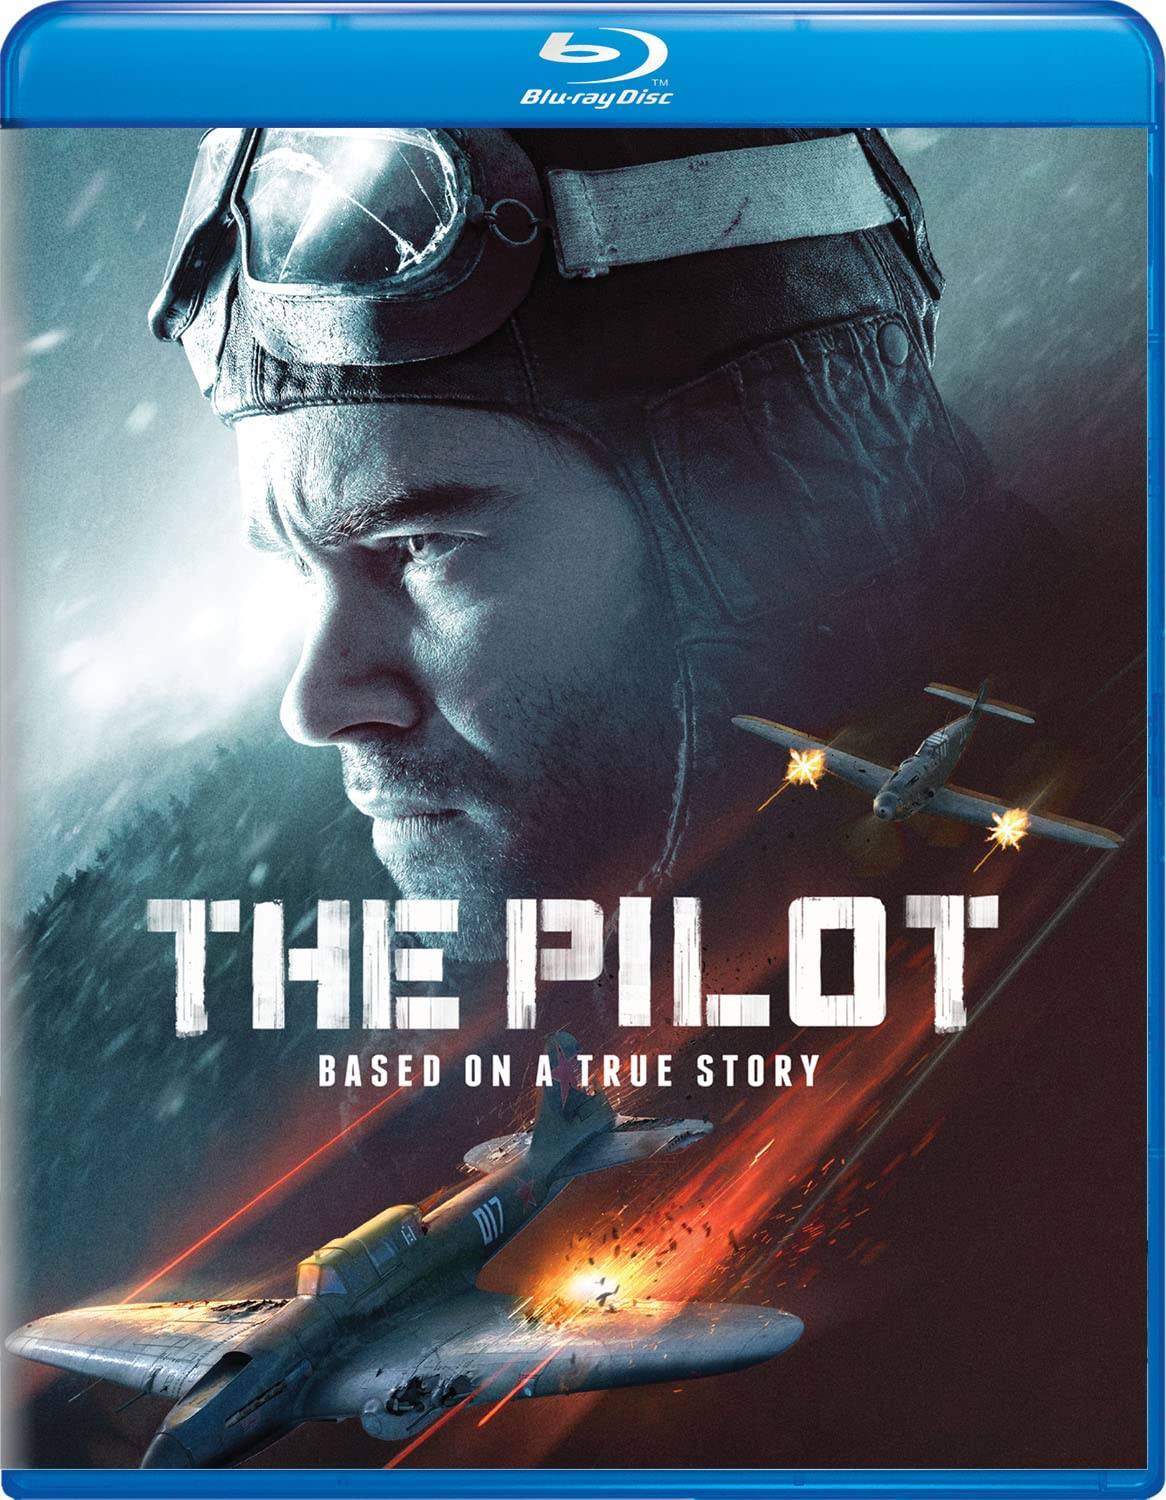 The Pilot A Battle for Survival 2022 English 720p BluRay Download